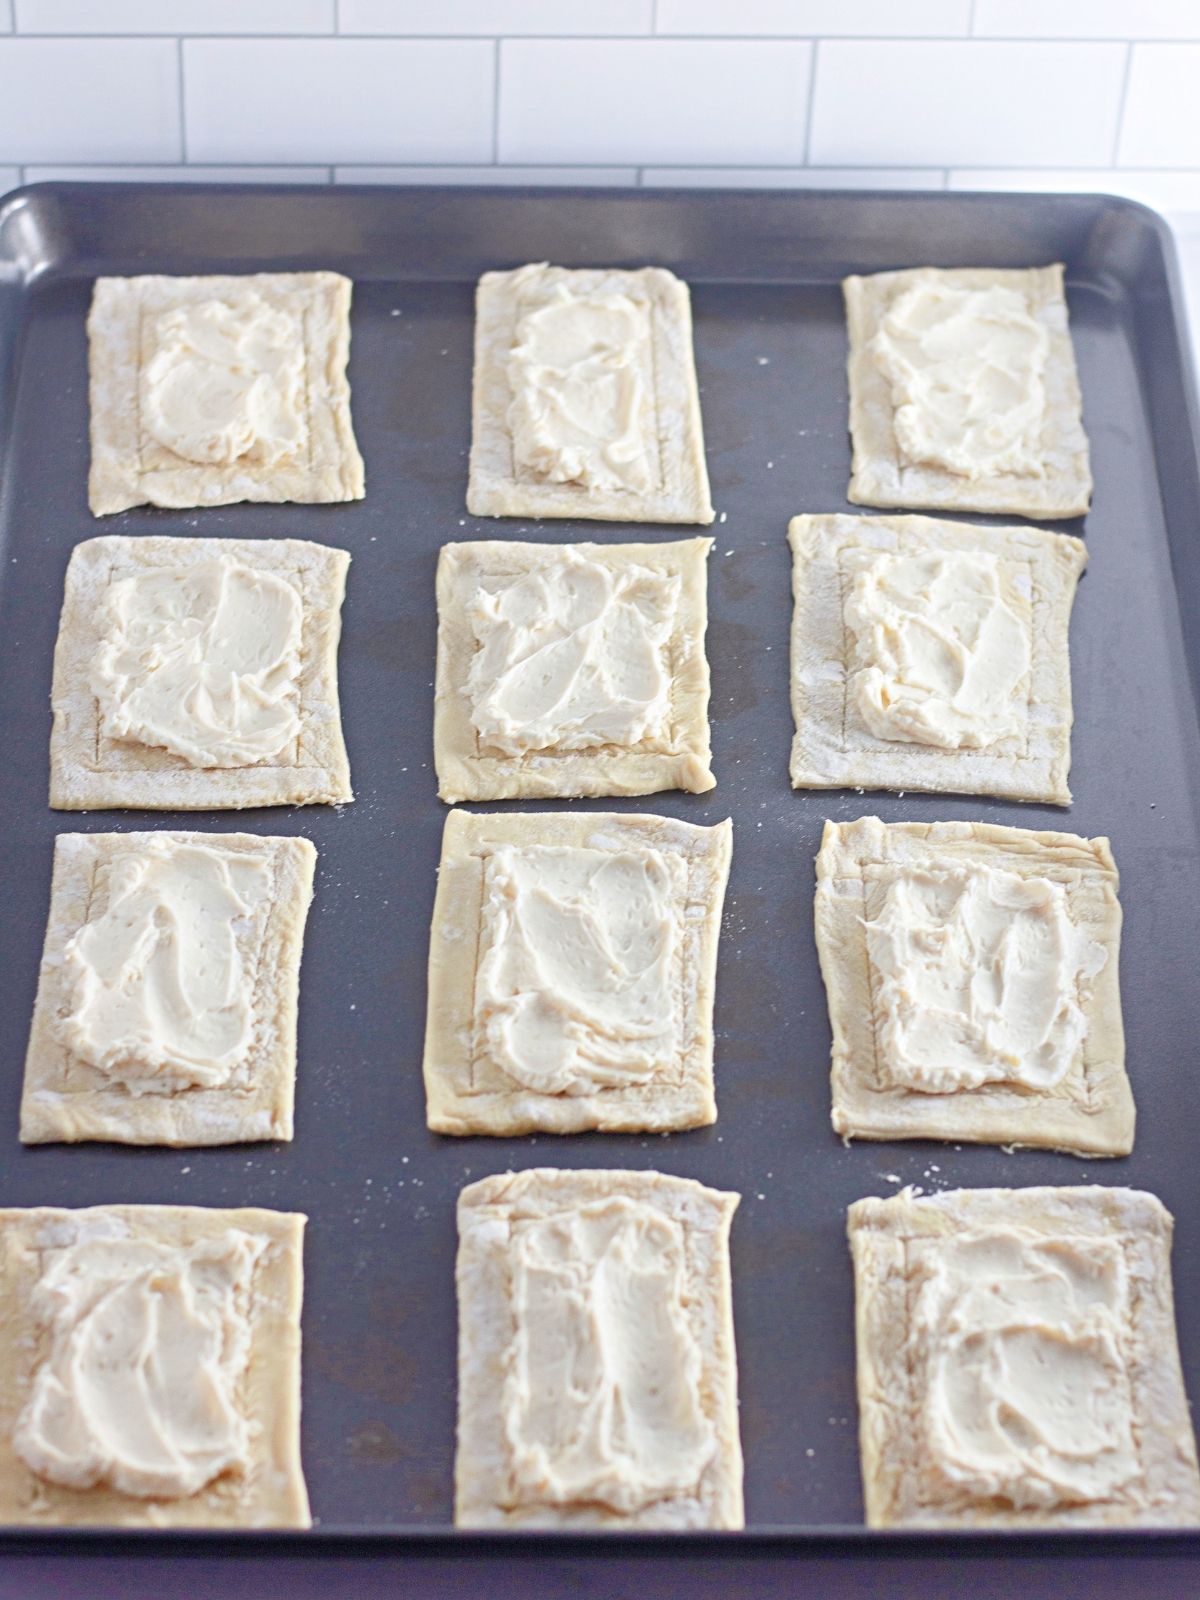 puff pastry with cream cheese filling before baking.